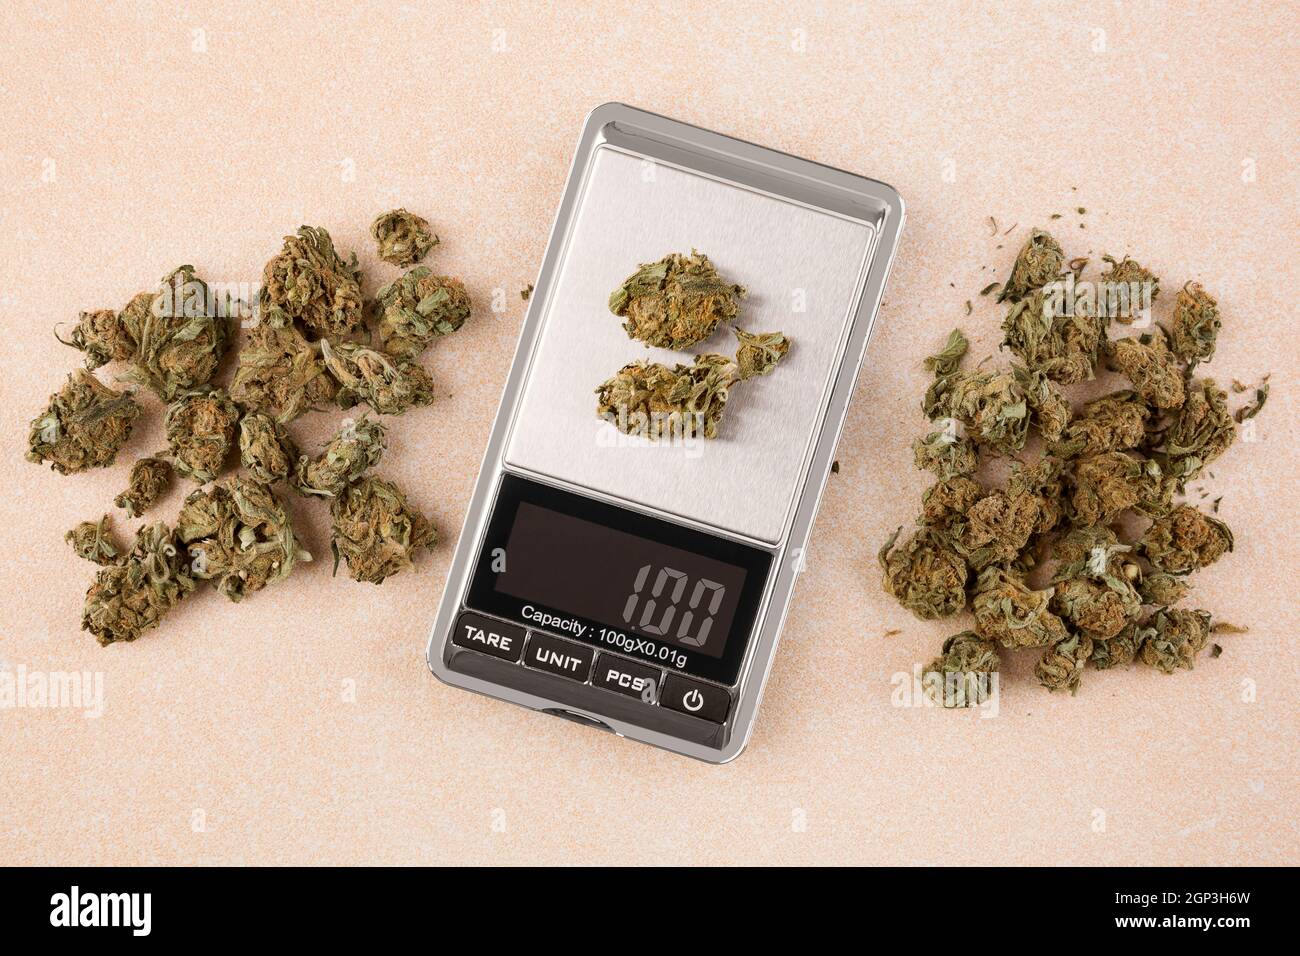 Bump Of Marijuana On The Scales,weighing And Sale Cannabis Buds,drug  Trafficking Close-up Stock Photo, Picture and Royalty Free Image. Image  129322798.